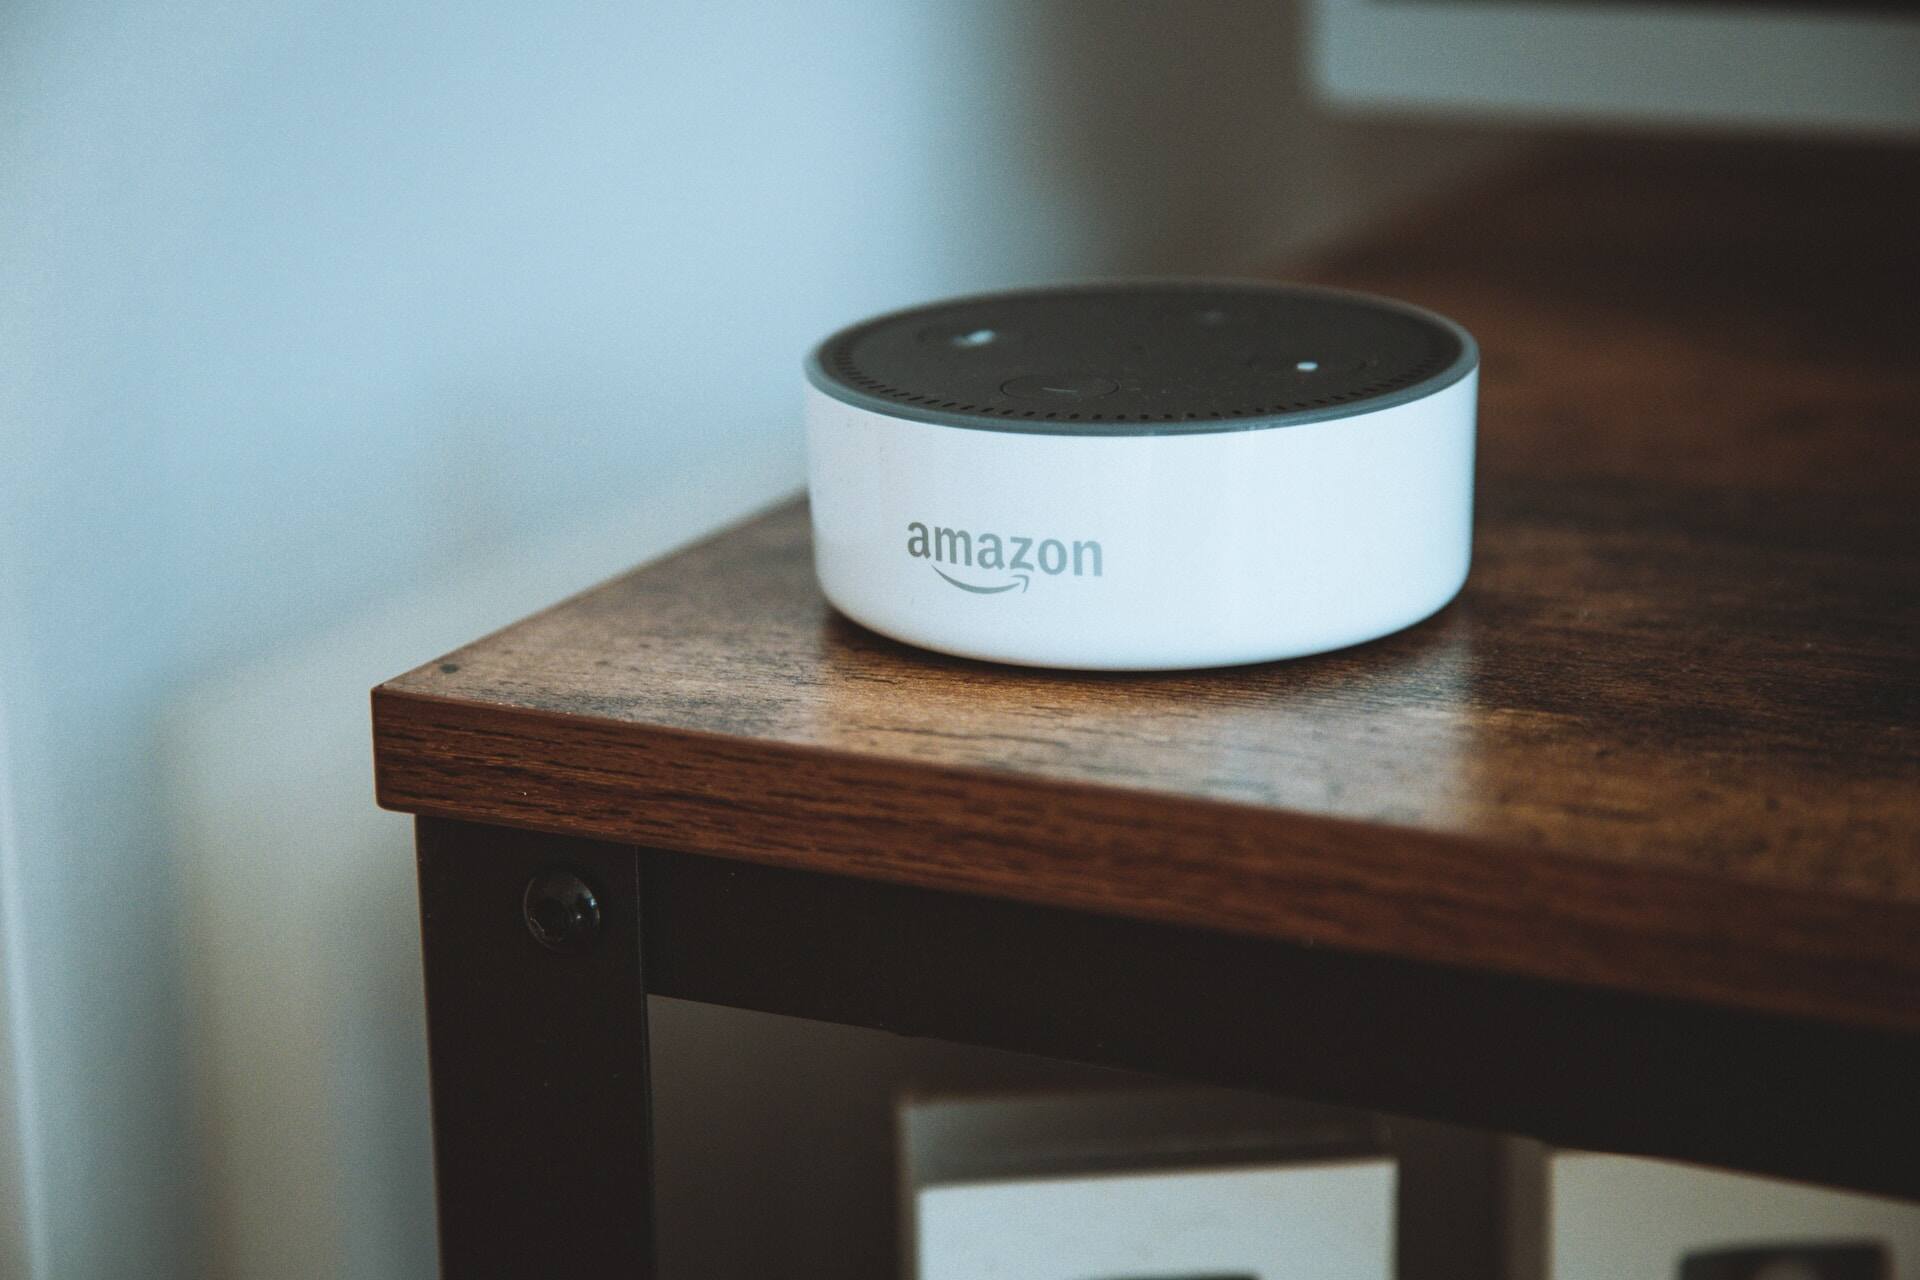 Amazon Echo Dot, showcasing the role of voice search in SEO.